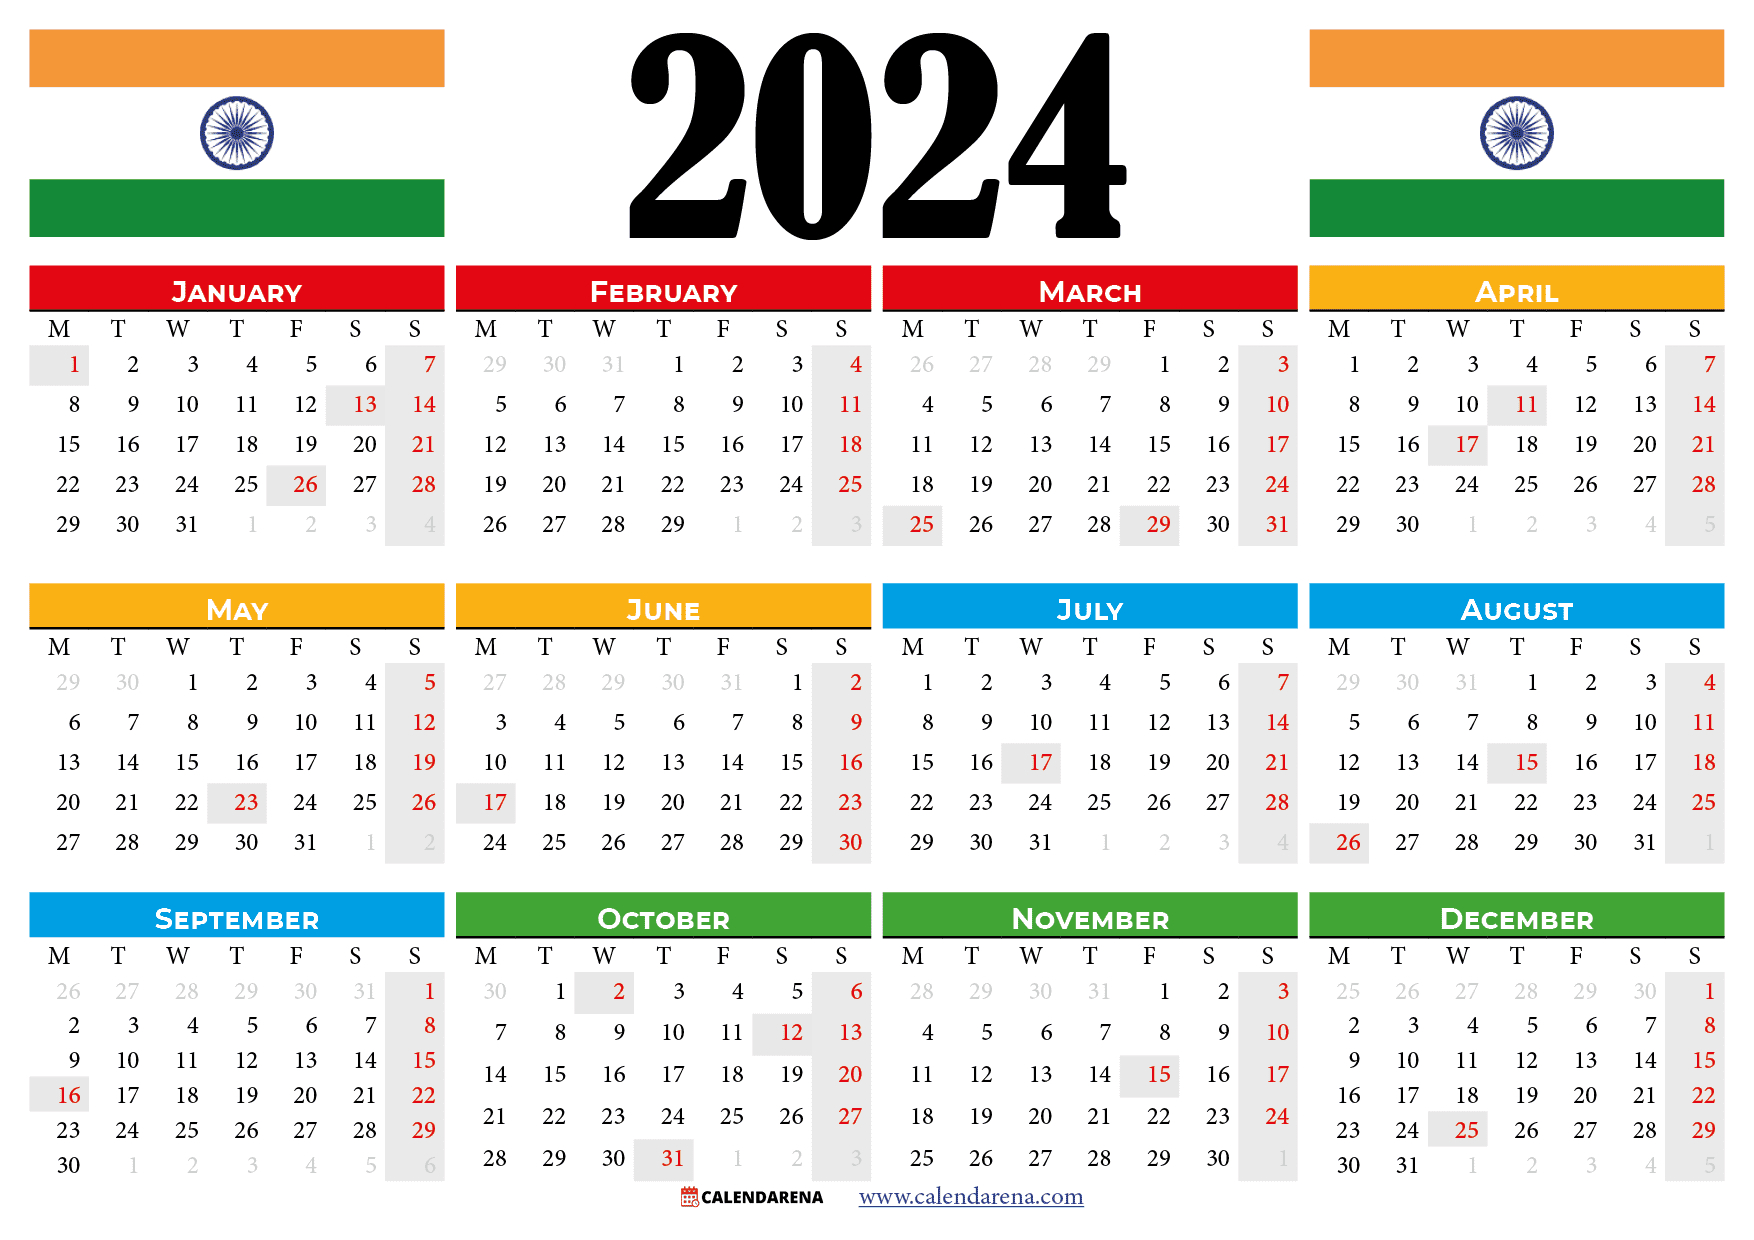 Calendar 2024 India With Holidays And Festivals | 2024 Printable Calendar With Holidays India